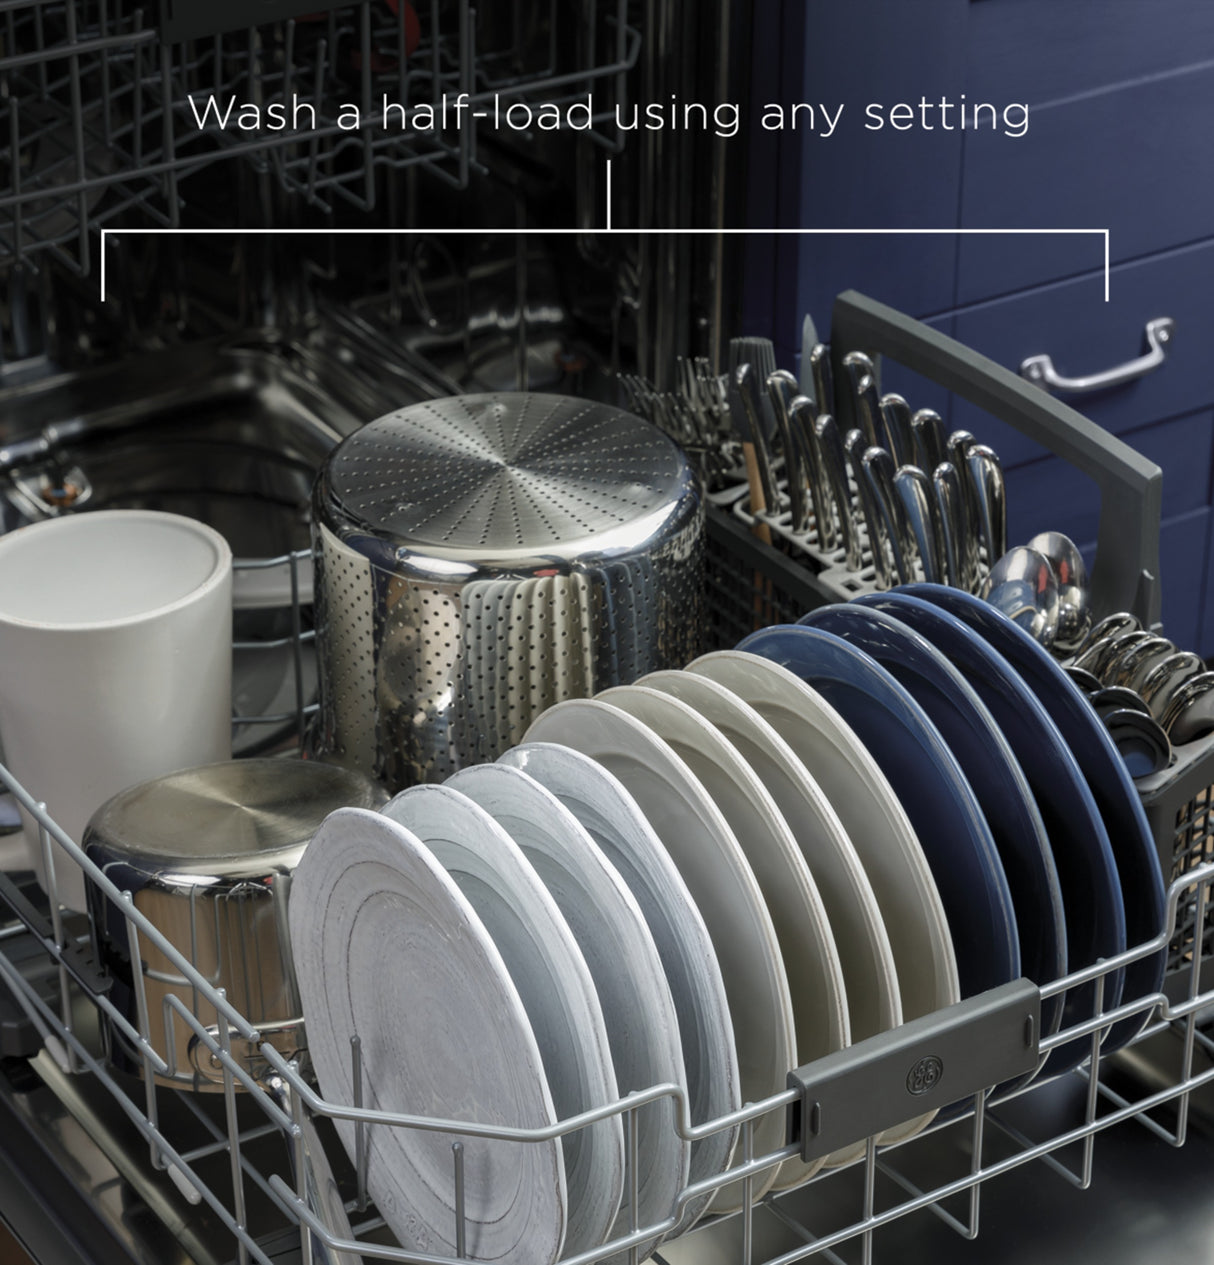 GE(R) ENERGY STAR(R) Top Control with Stainless Steel Interior Dishwasher with Sanitize Cycle & Dry Boost with Fan Assist - (GDT645SGNWW)